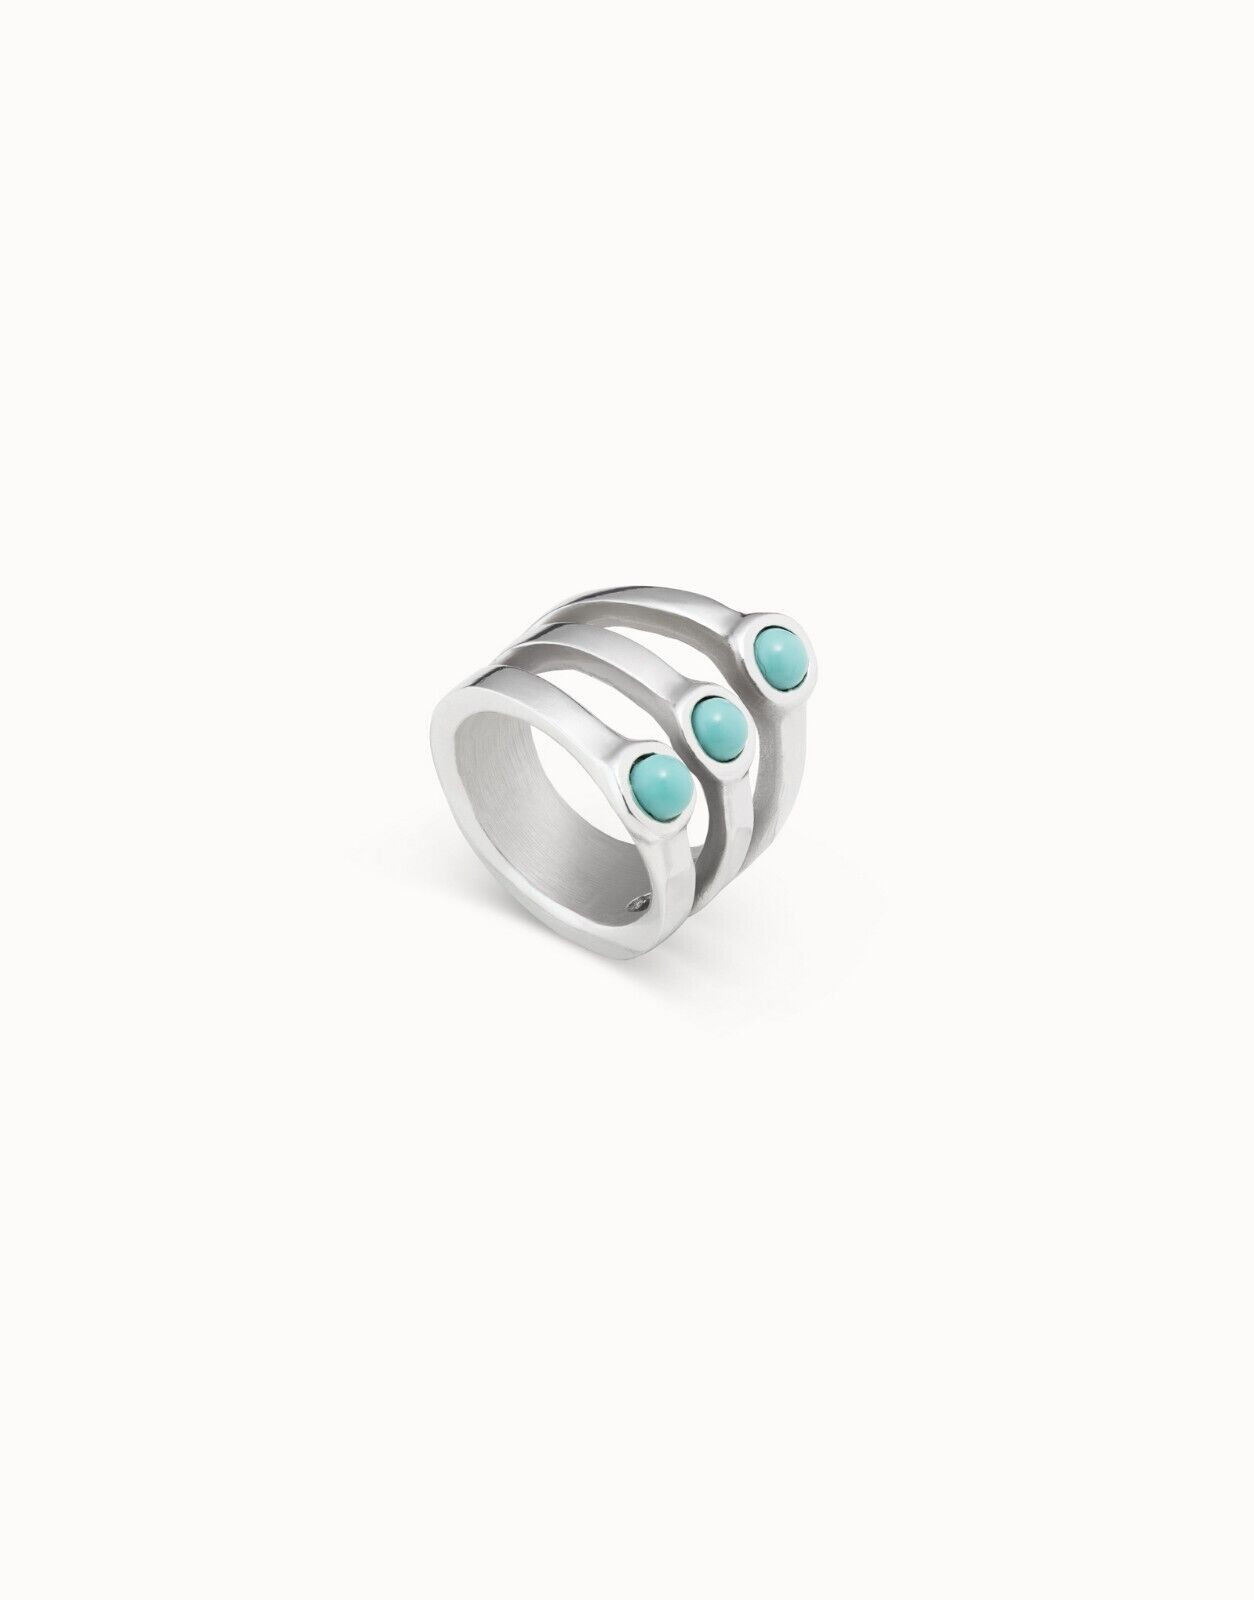 UNO DE 50 SOUL RING SILVER/TURQUOISE SIZE LARGE ANI0782TQSMTL18.NEW IN POUCH